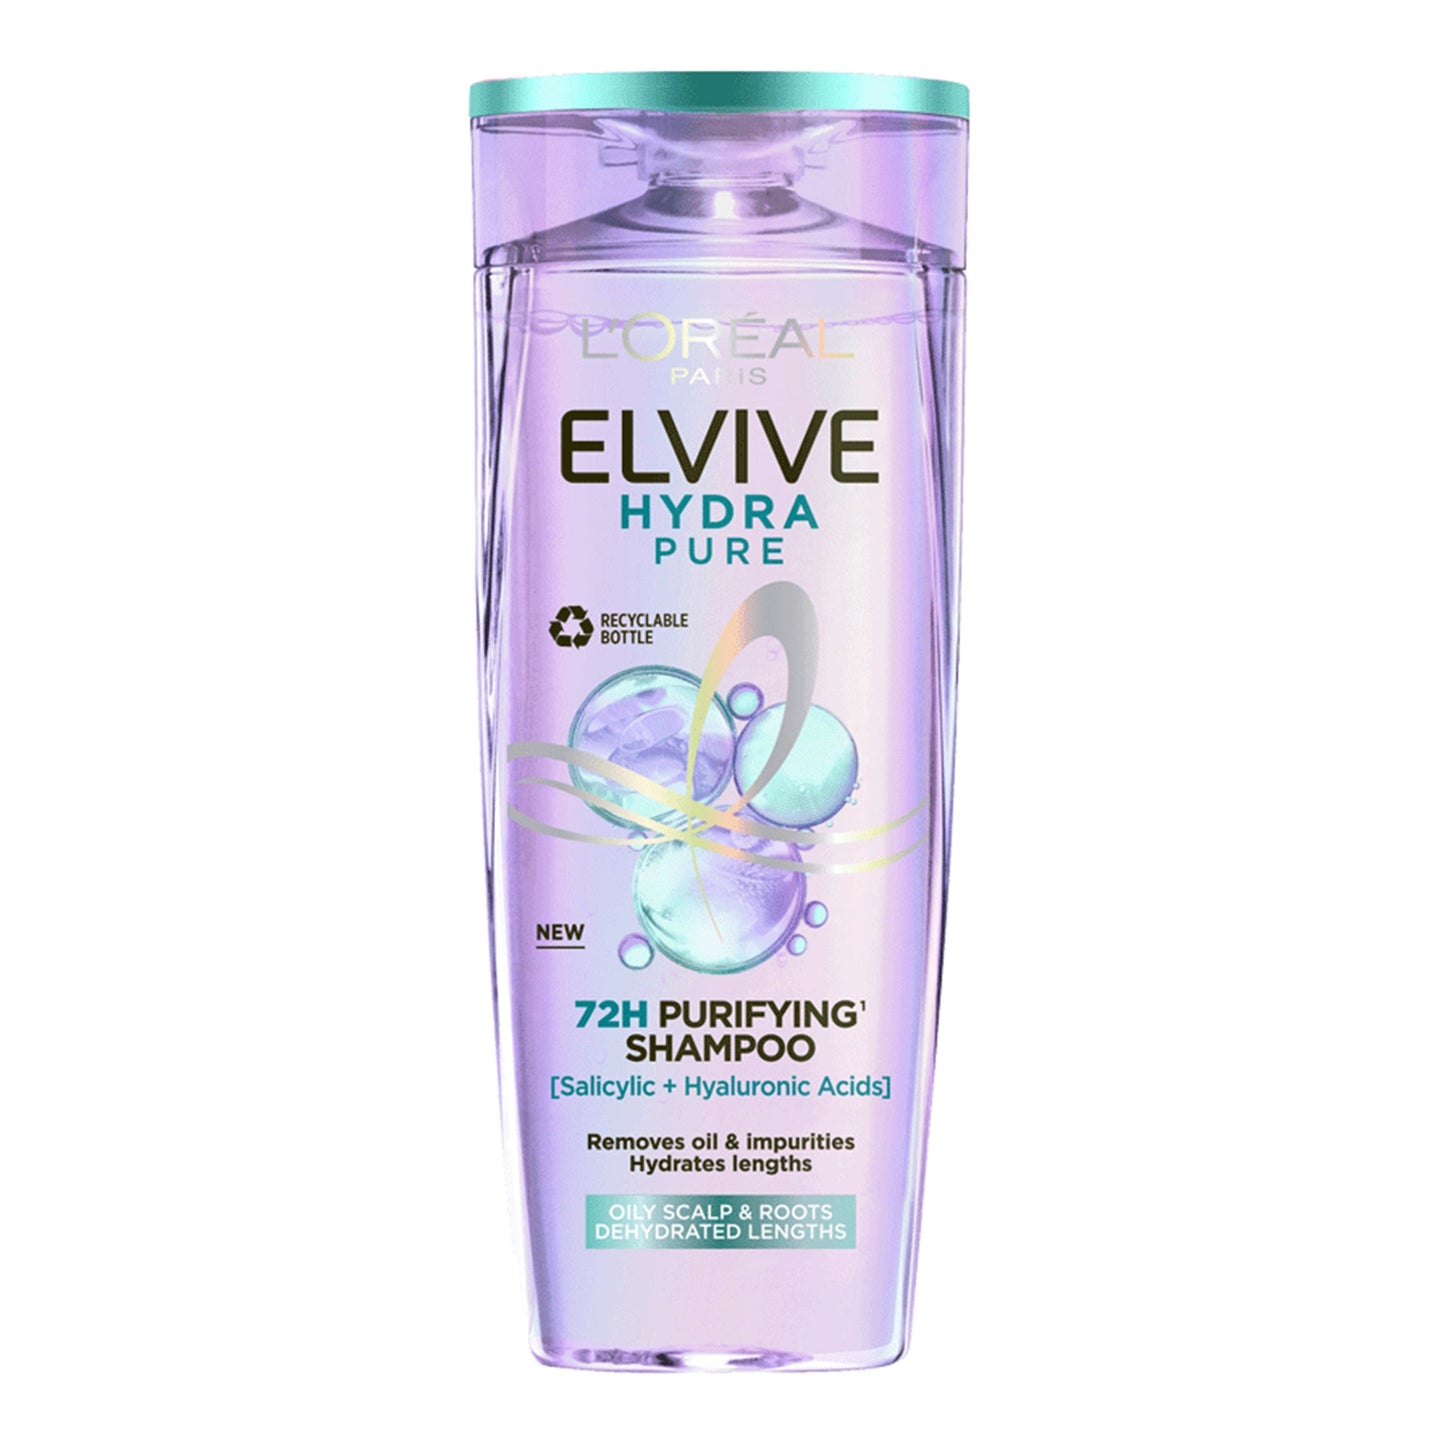 L'OREAL PARIS - ELVIVE HYDRA PURE 72H PURIFYING SHAMPOO WITH SALICYLIC + HYALURONIC ACIDS - 300ML